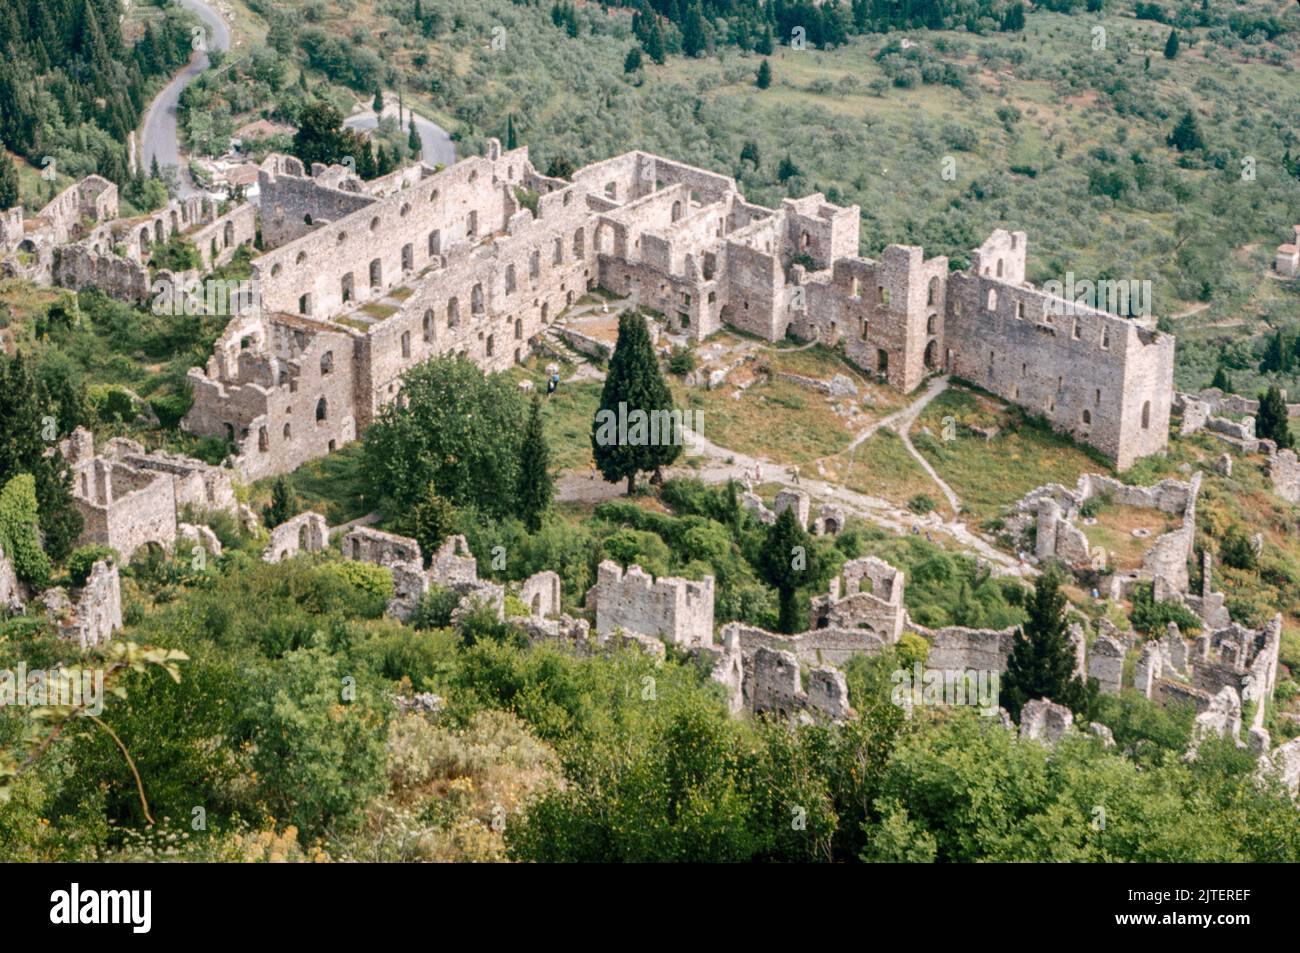 Despot’s Palace at Mystras (Mistras or Myzithras), a fortified town and a former municipality in Laconia, Peloponnese, Greece near ancient Sparta, it served as the capital of the Byzantine Despotate of the Morea. March 1980. Archival scan from a slide. Stock Photo